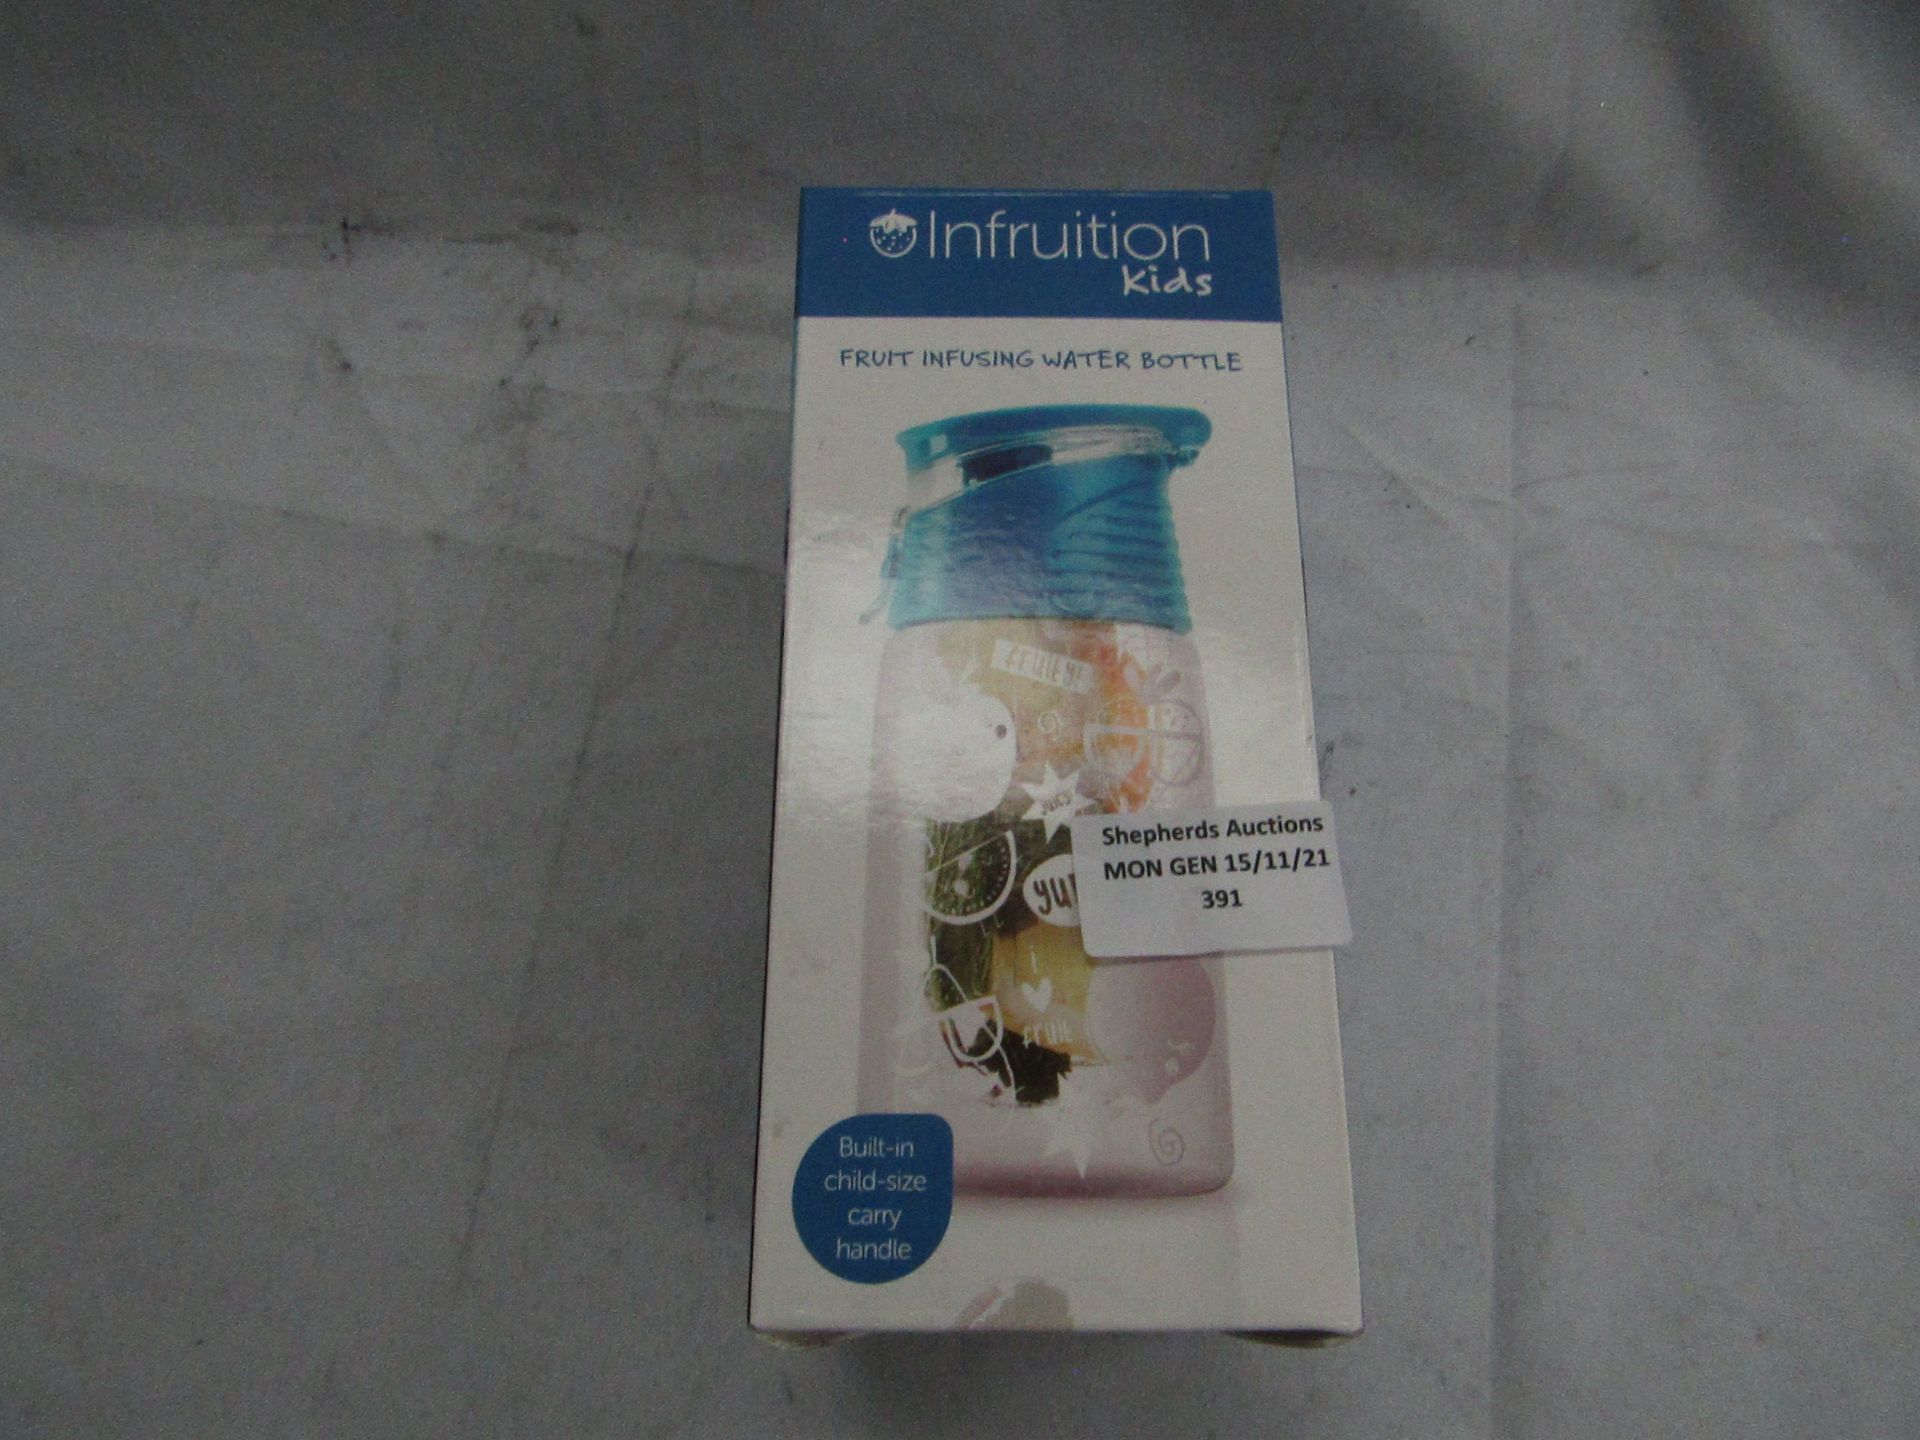 Infruition Kids - Fruit Infusing Water Bottle 450ml - Unused & Boxed.